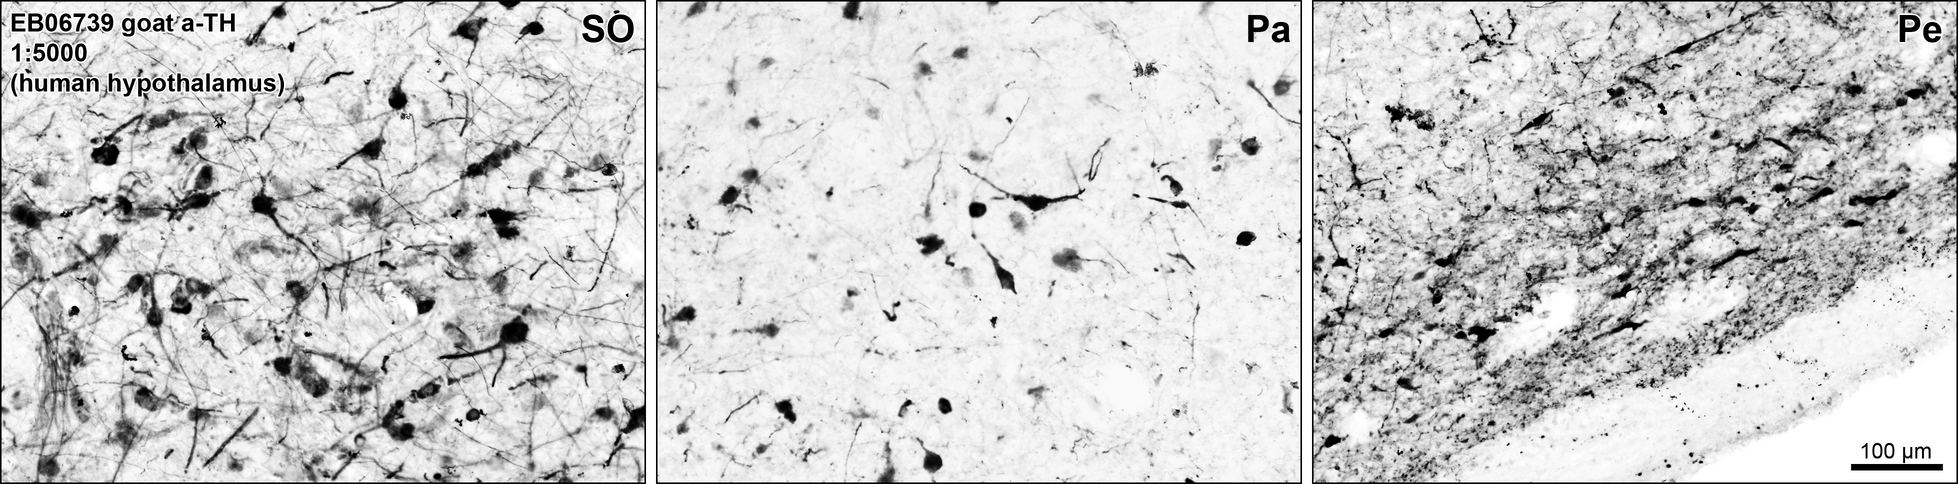 TH / Tyrosine Hydroxylase Antibody - EB6739 (0.1µg/ml) staining of PFA-perfused cryosection of Human Hypothalamic supraoptic (SO), paraventricular (Pa) and periventricular (Pe) nuclei. Antigen retrieval with citrate buffer pH 6 at 80C for 30min, HRP-staining with Ni-DAB after Biotin-SP-antigoat amplification.